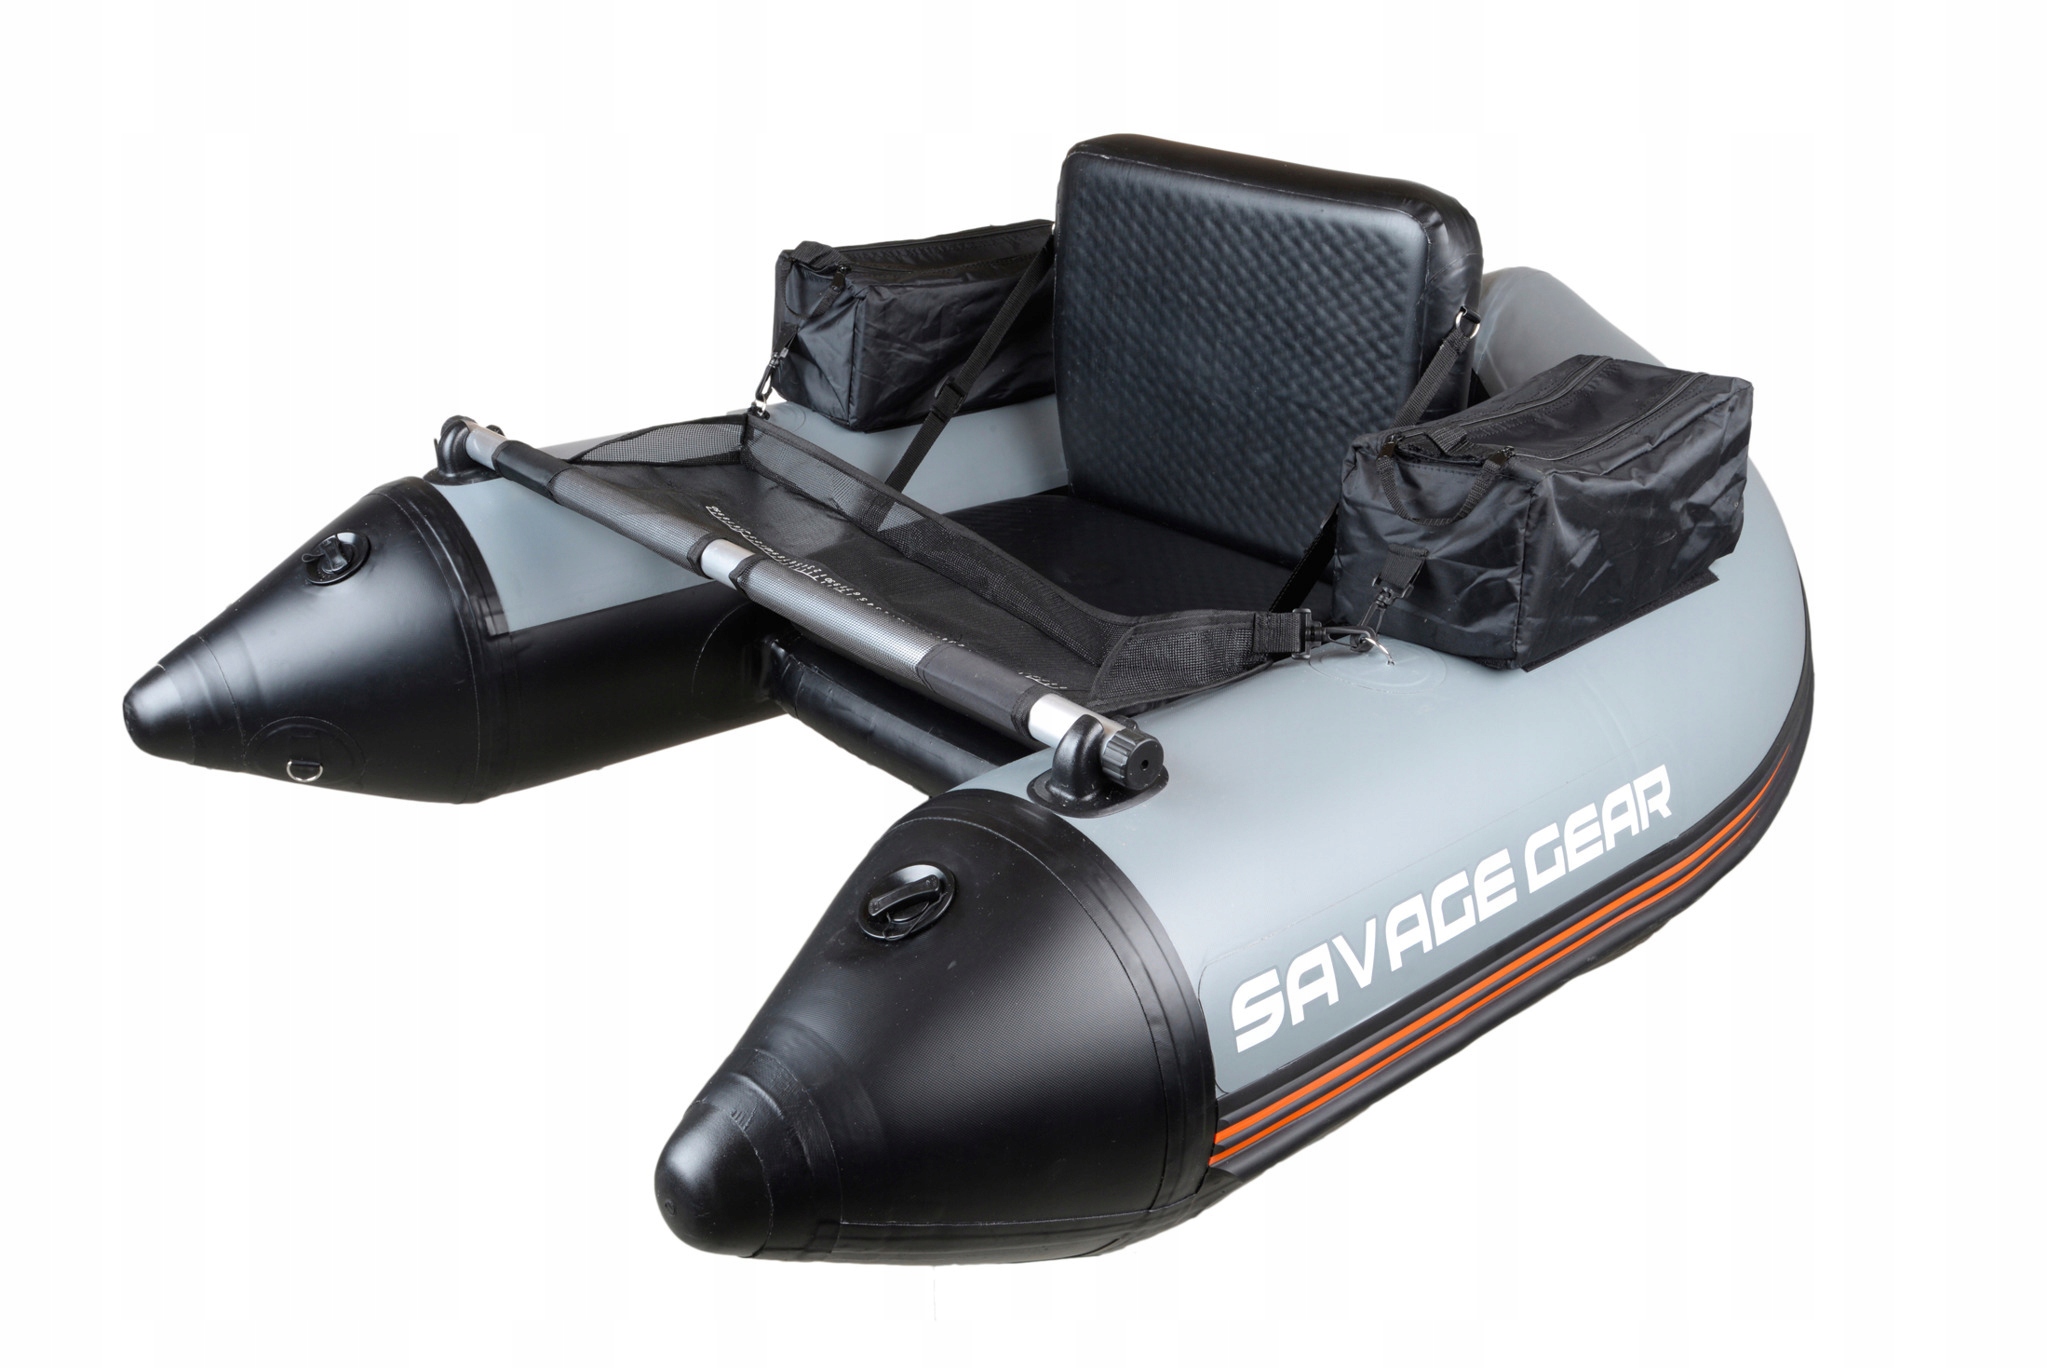 SAVAGE GEAR HIGHT RIDER BELLY BOAT 150